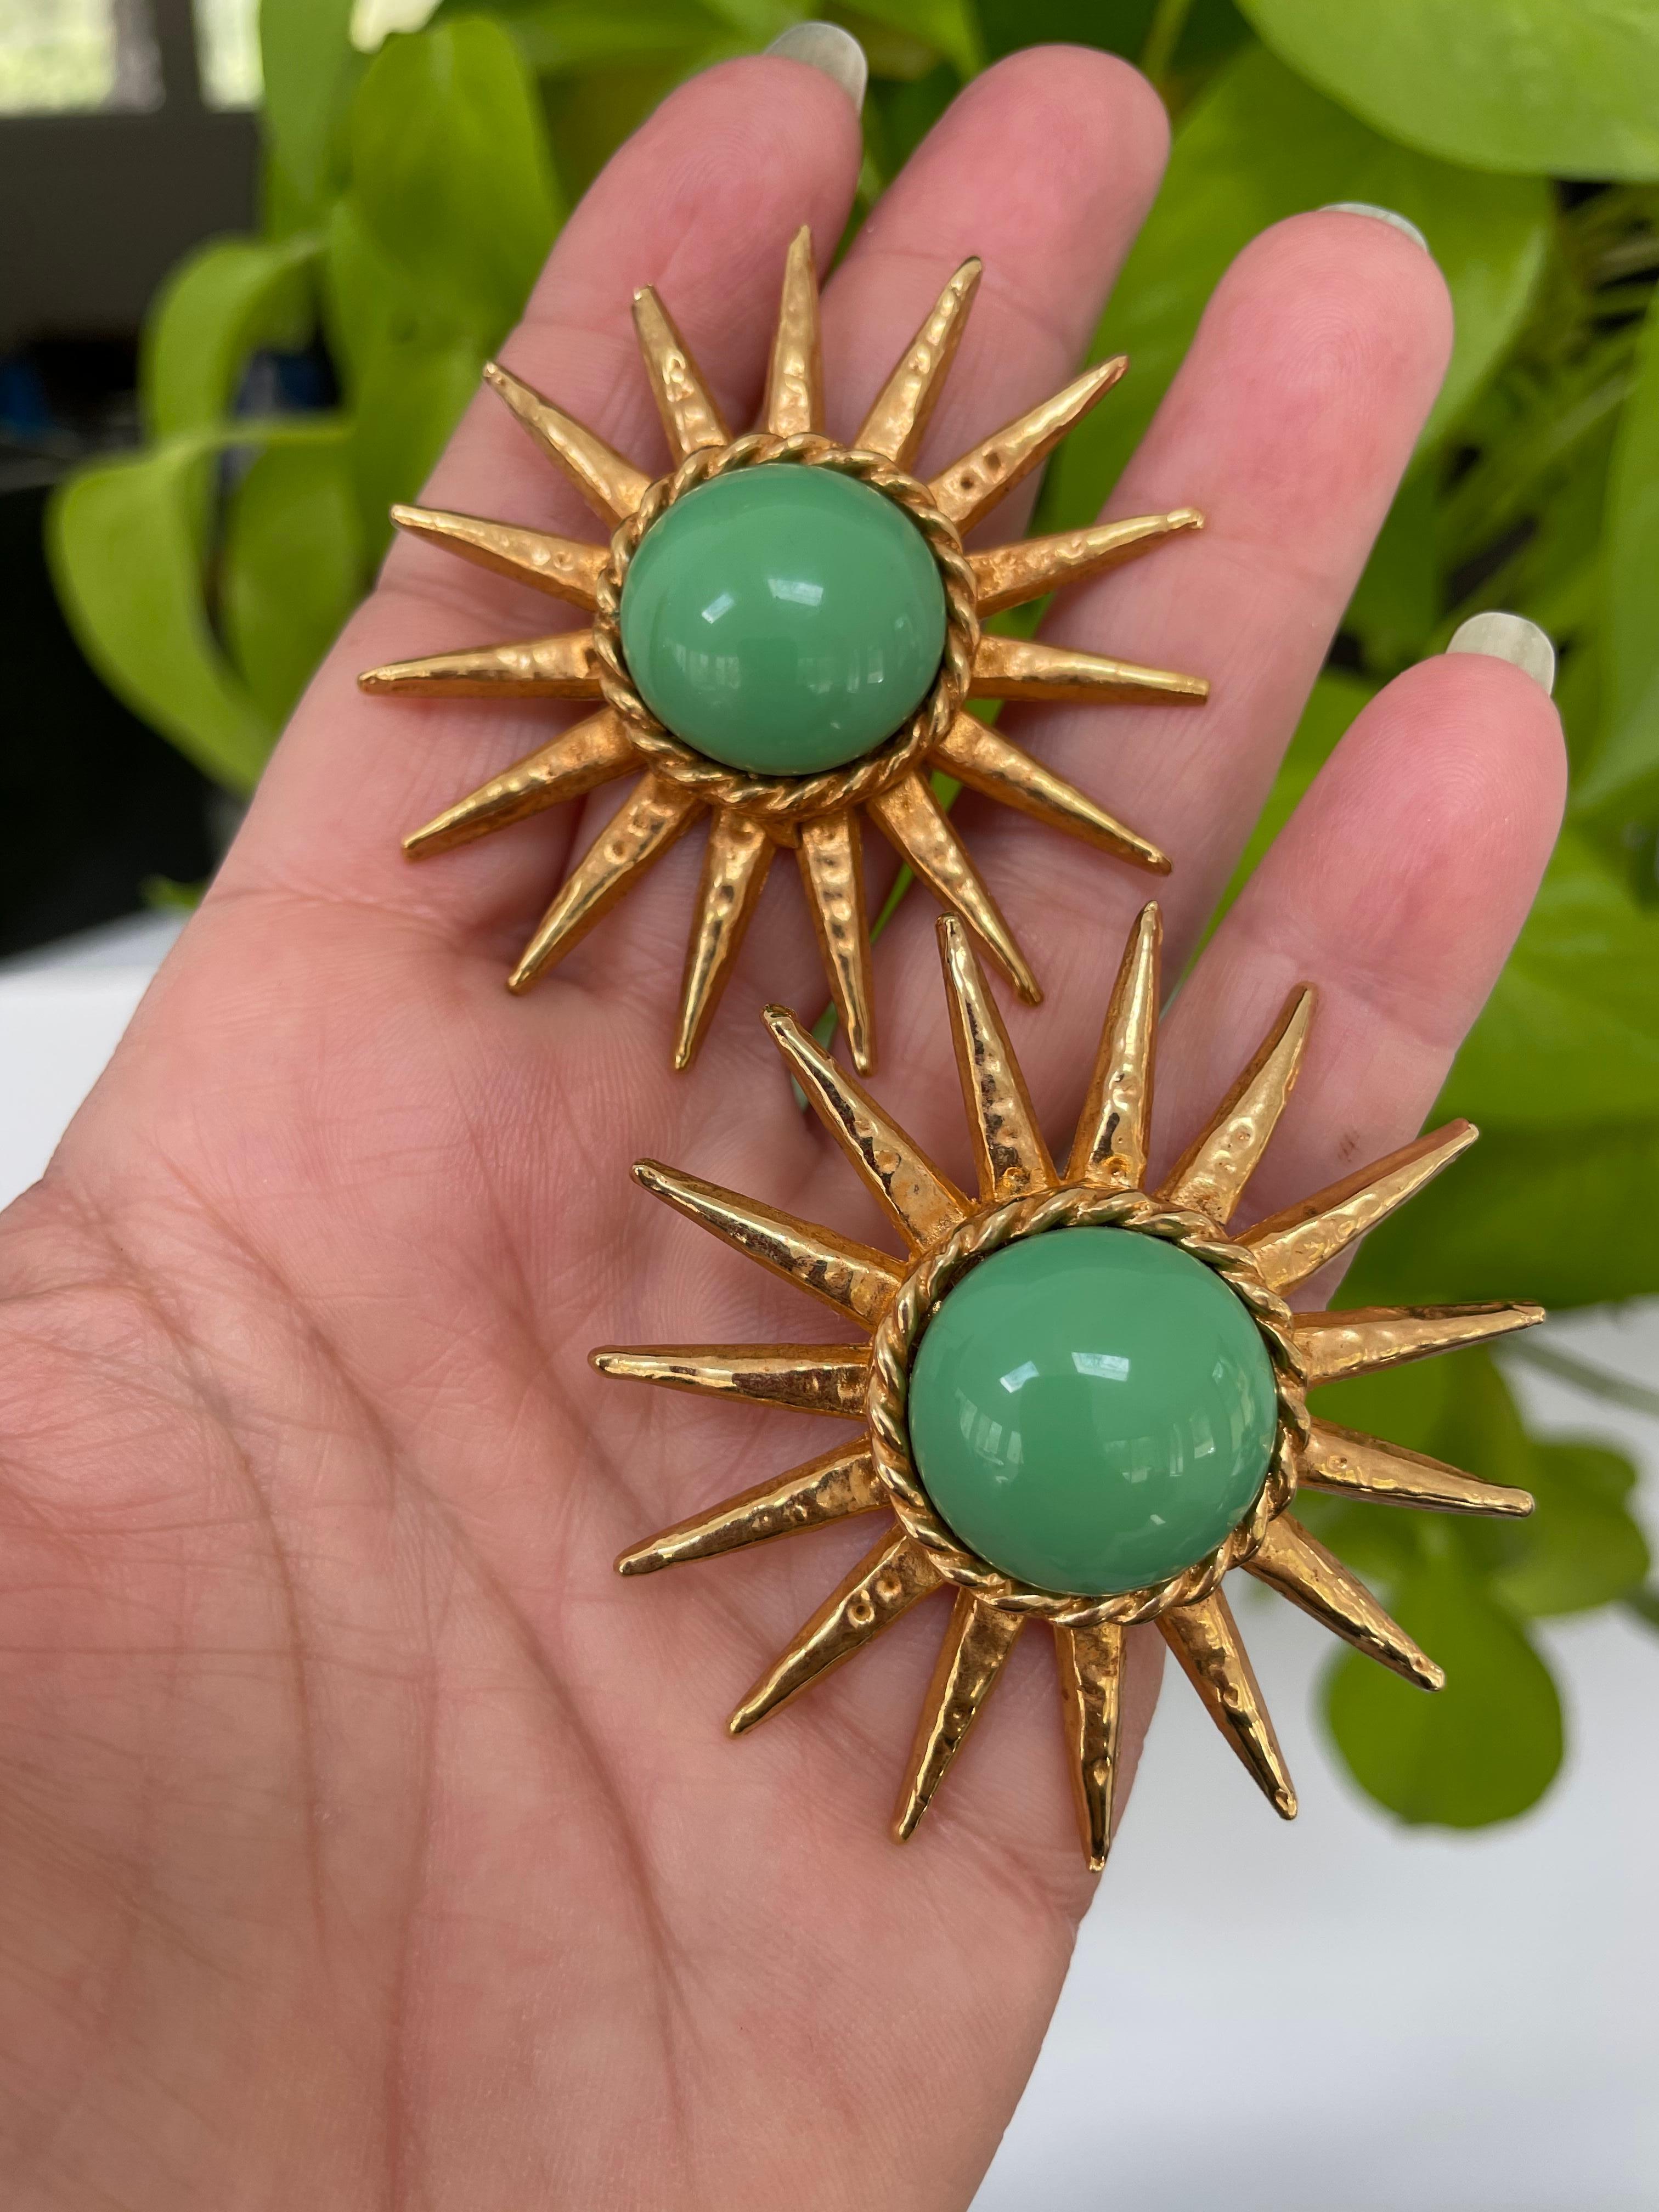 Philippe Ferrandis Clip on earrings. Stunning Green Glass center 
Circa 1990s New Old Stock
Still on original earring card from Neiman Marcus 
Measure 2.19